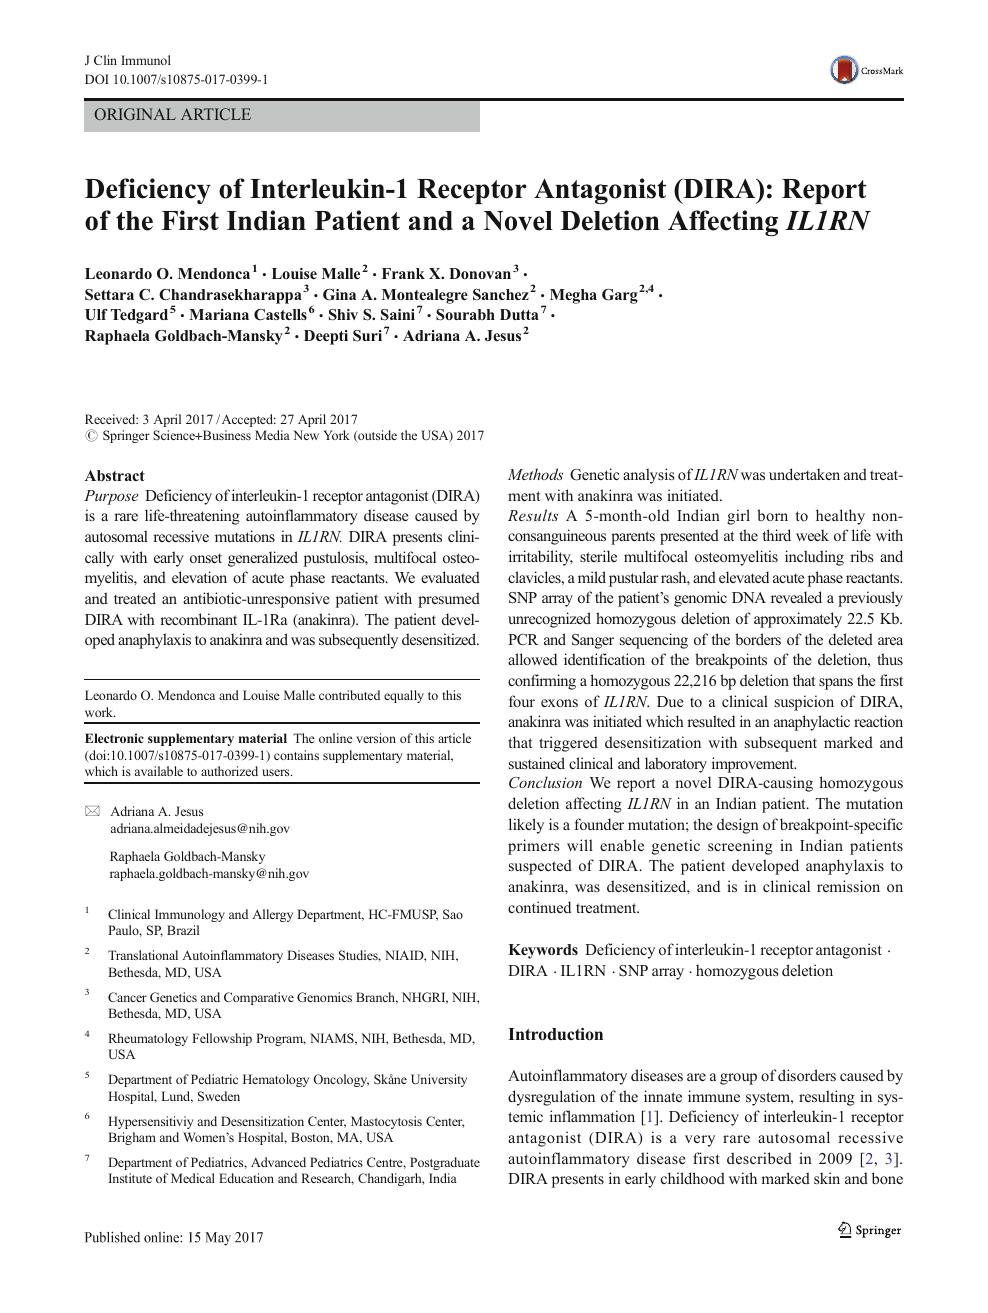 Deficiency Of Interleukin 1 Receptor Antagonist Dira Report Of The First Indian Patient And A Novel Deletion Affecting Il1rn Topic Of Research Paper In Clinical Medicine Download Scholarly Article Pdf And Read